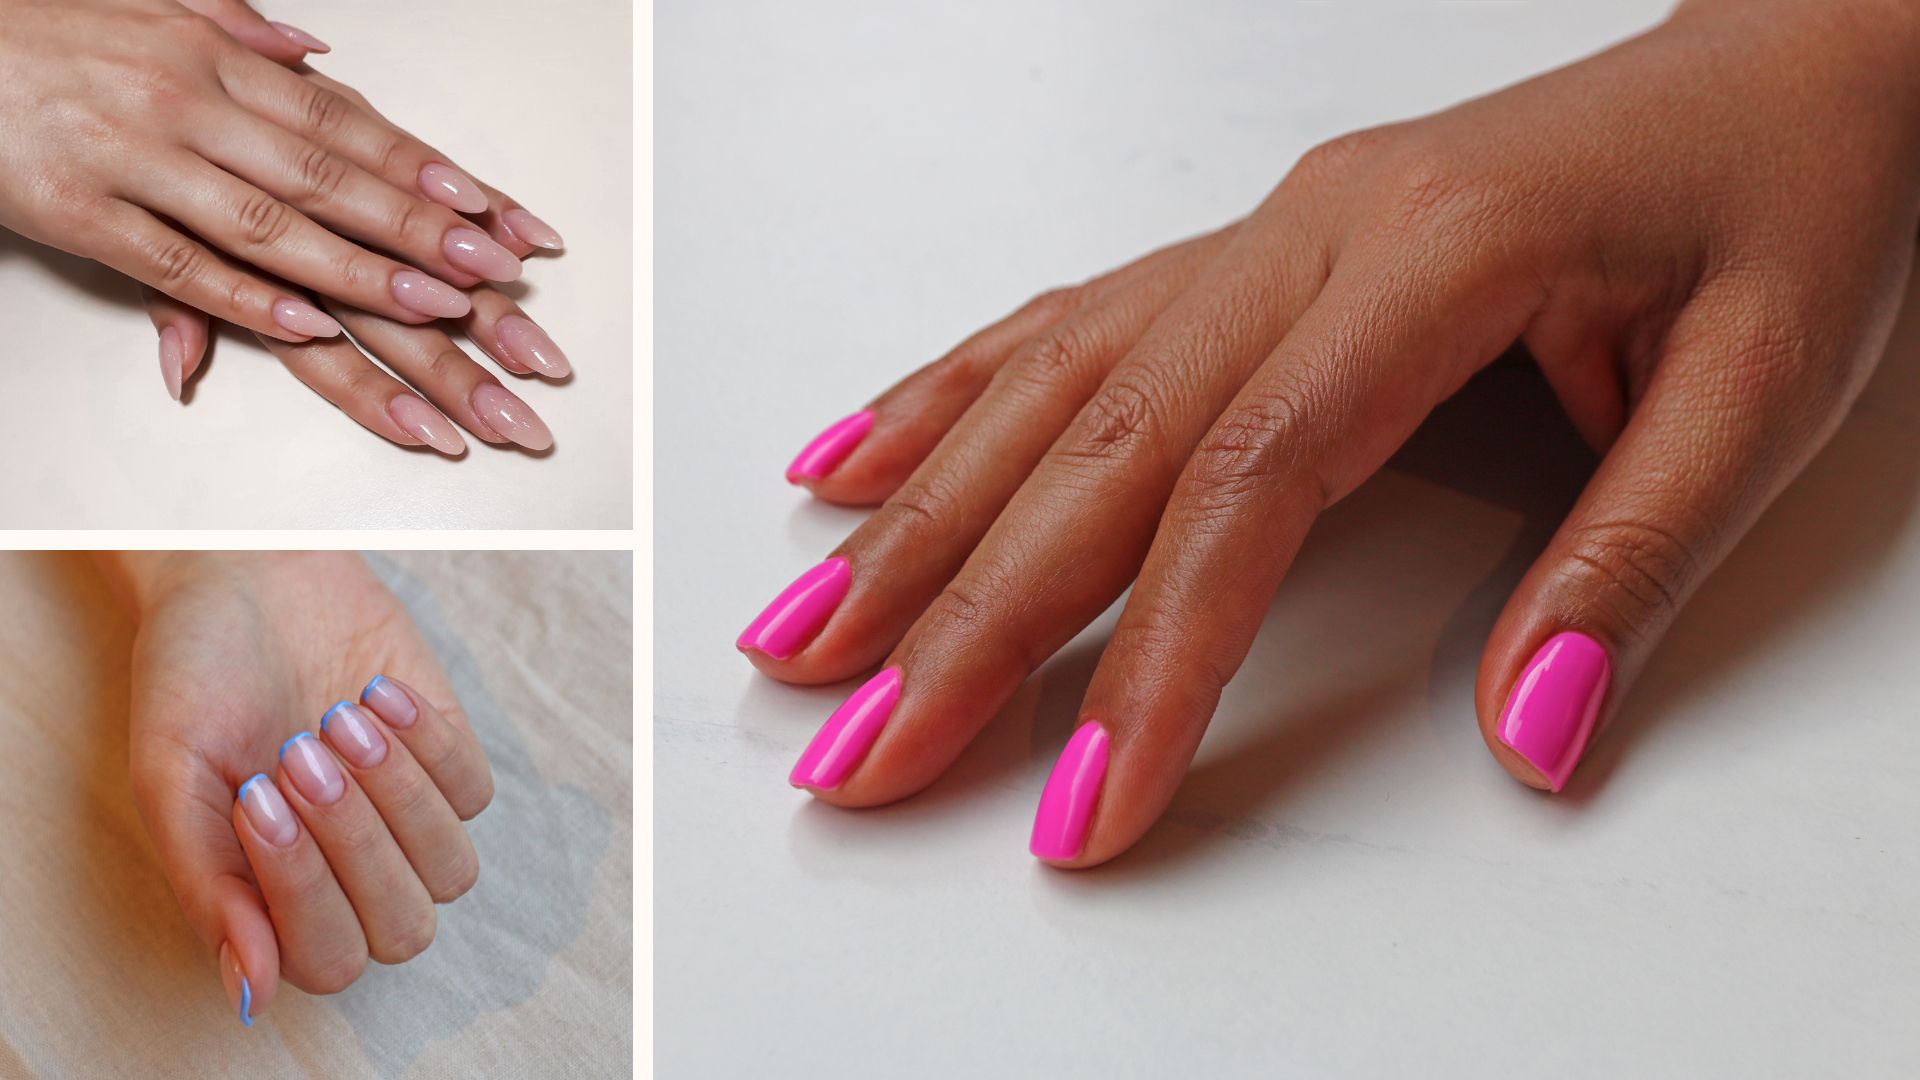 1. "10 Cute August Nail Colors to Try This Summer" - wide 7